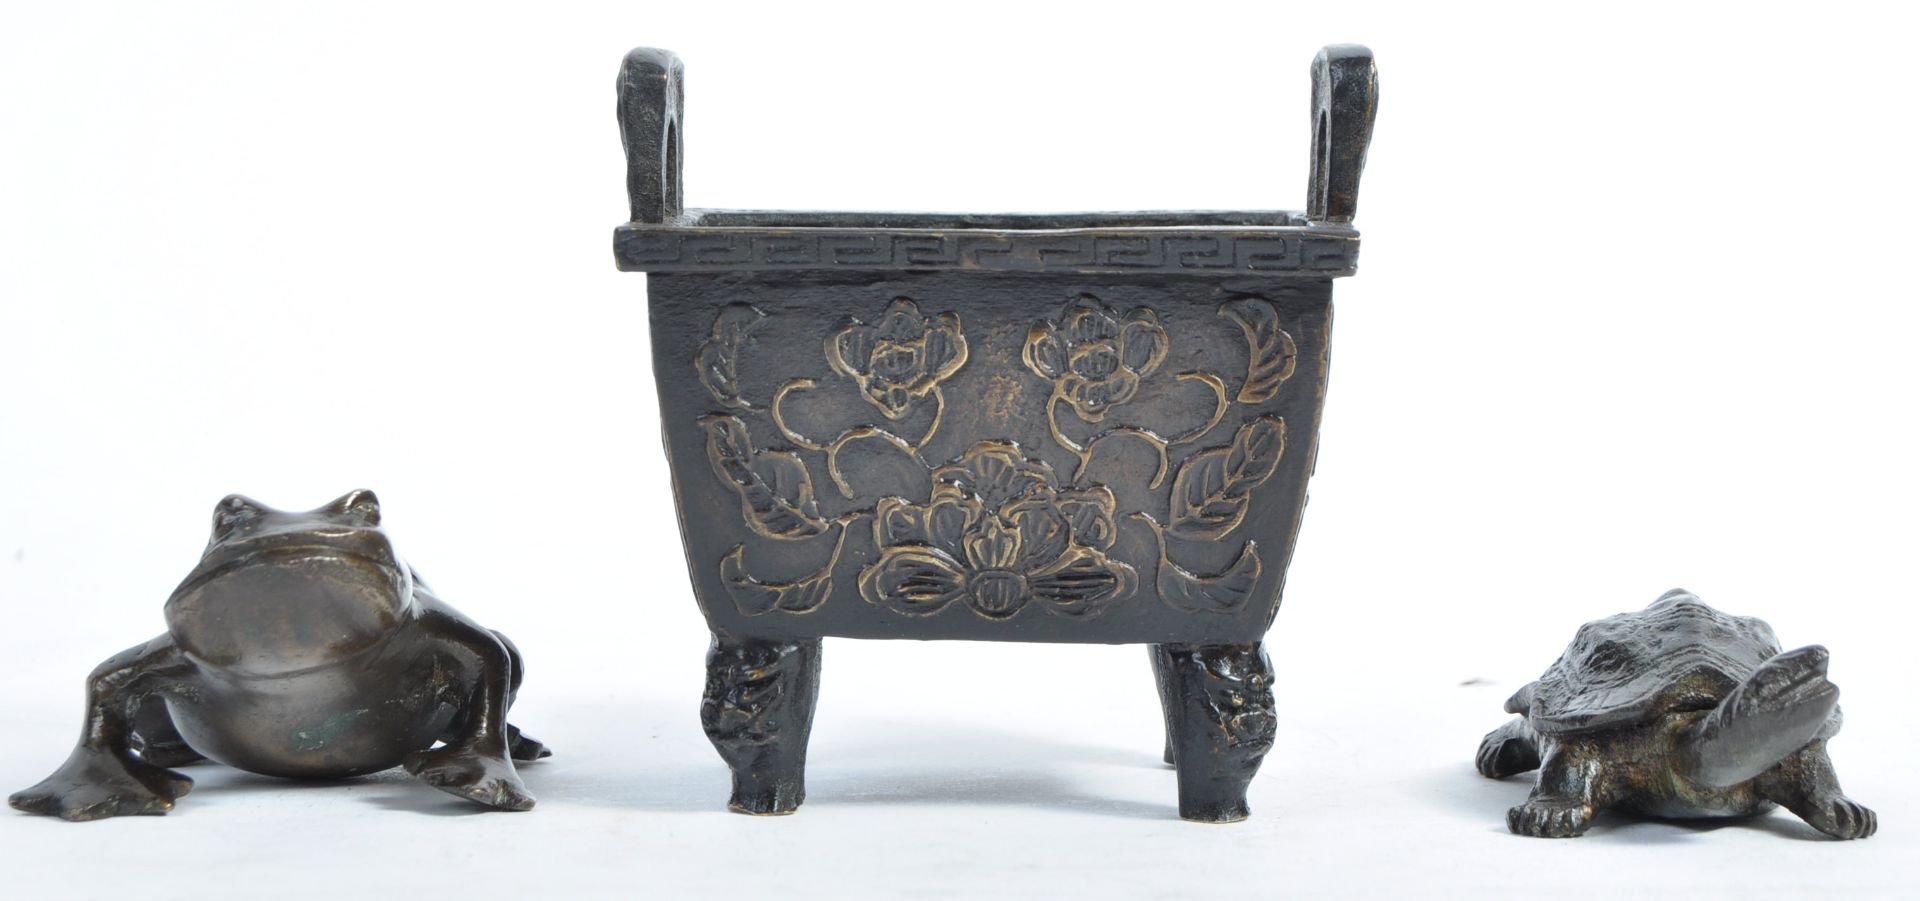 COLLECTION OF THREE CHINESE BRONZES DATING FROM THE 19TH CENTURY